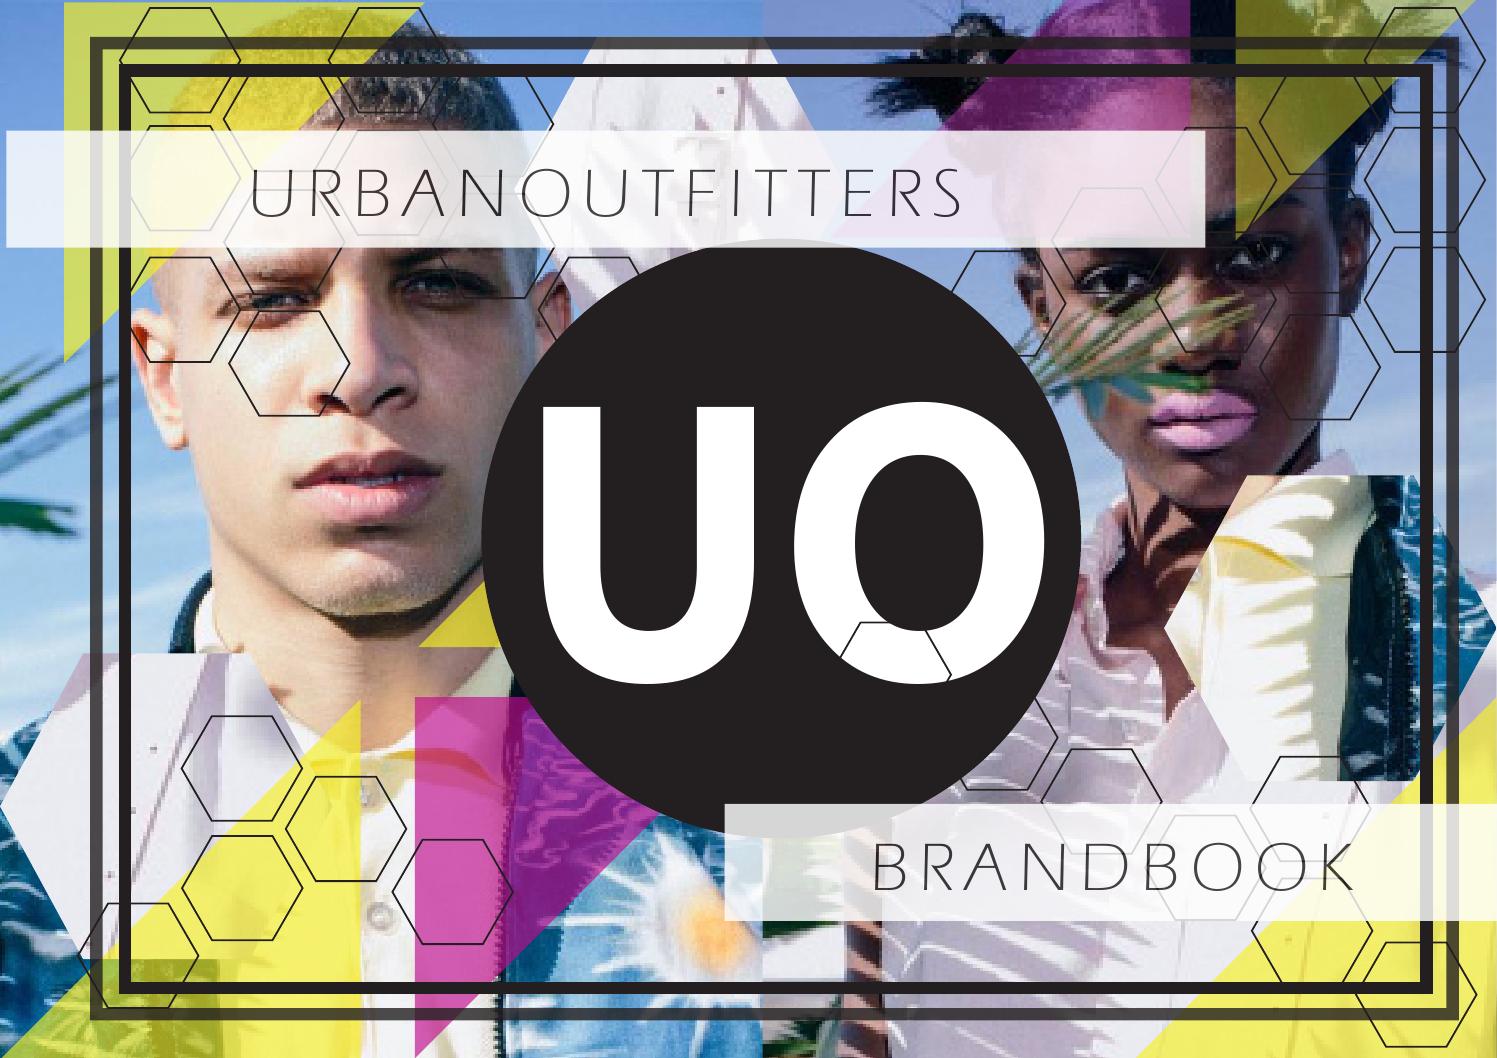 Urban Outfitter's Brand Book